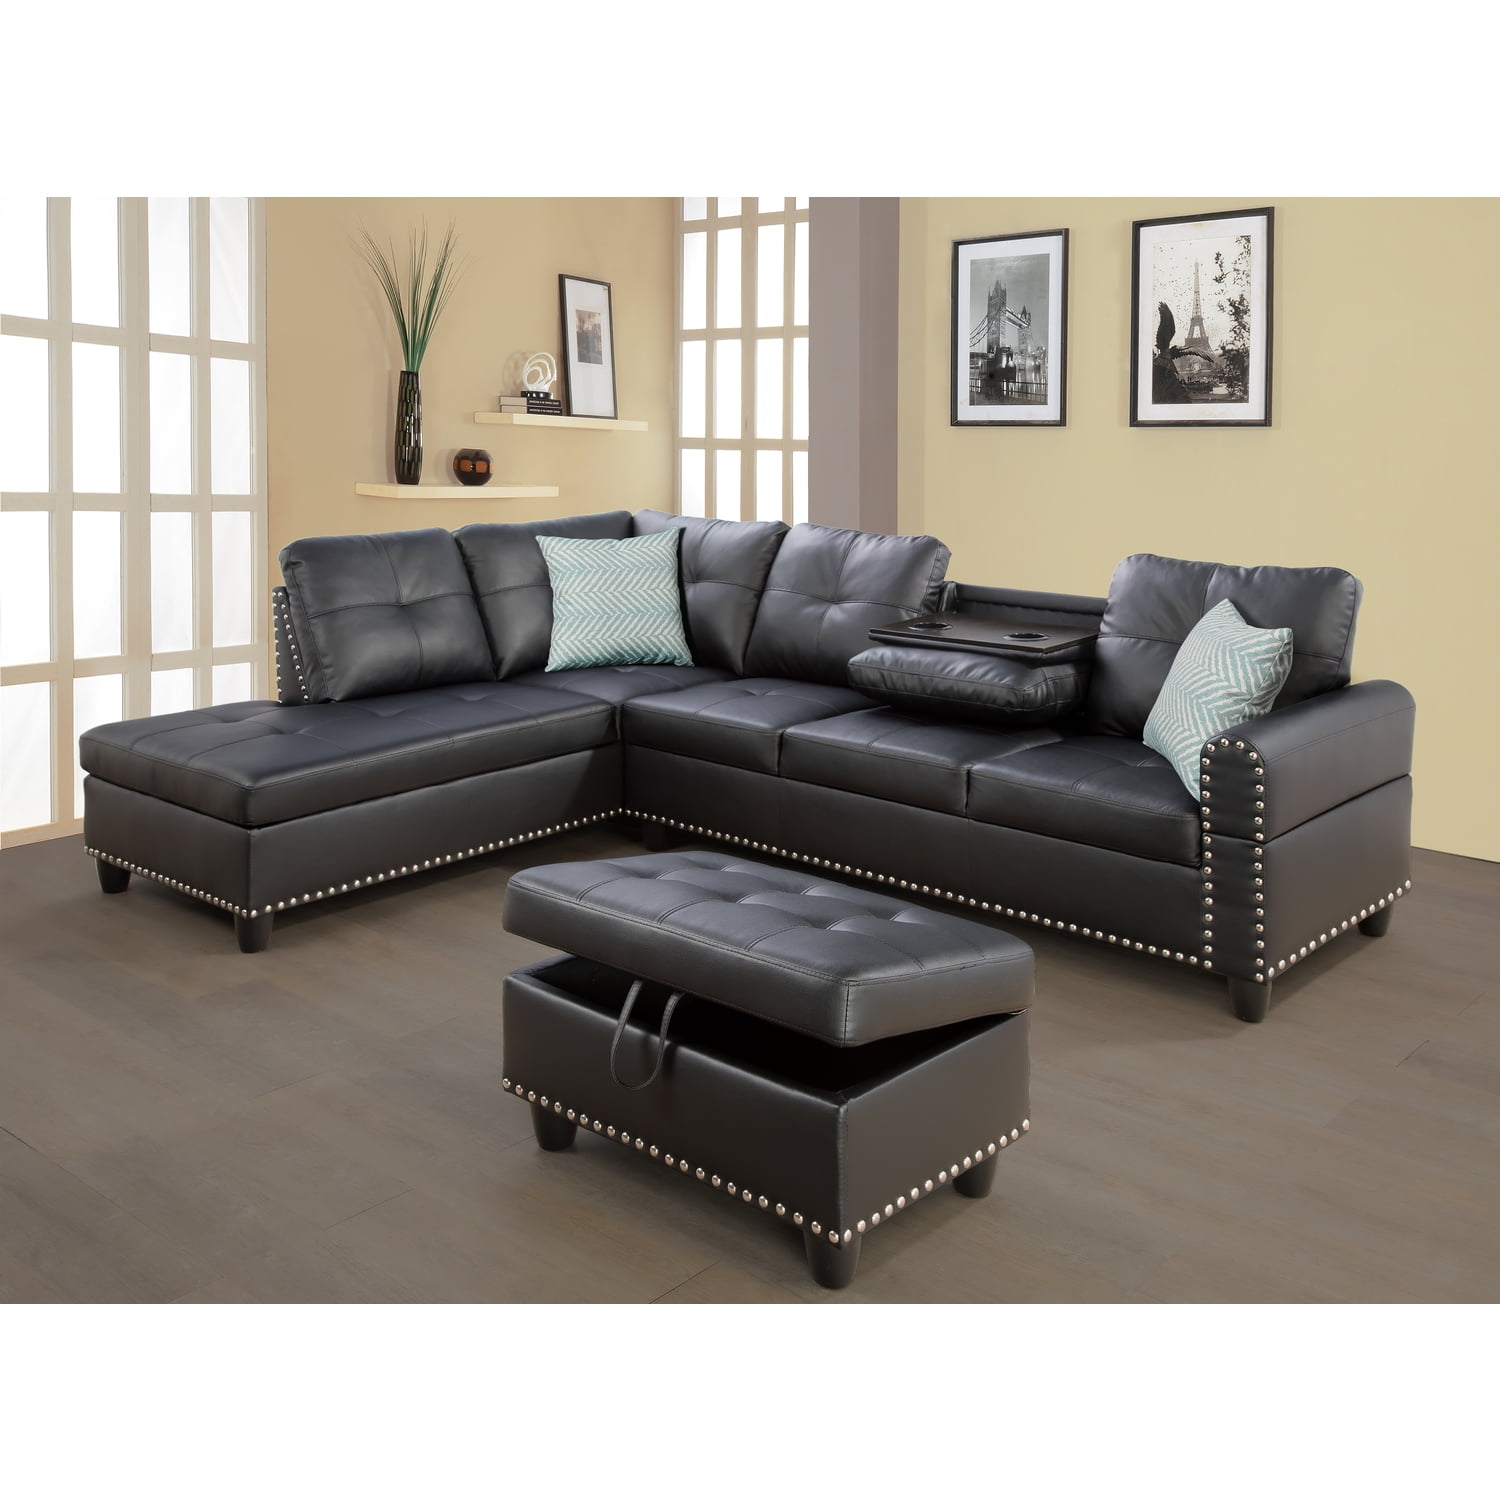 Devion Furniture Faux Leather Sectional